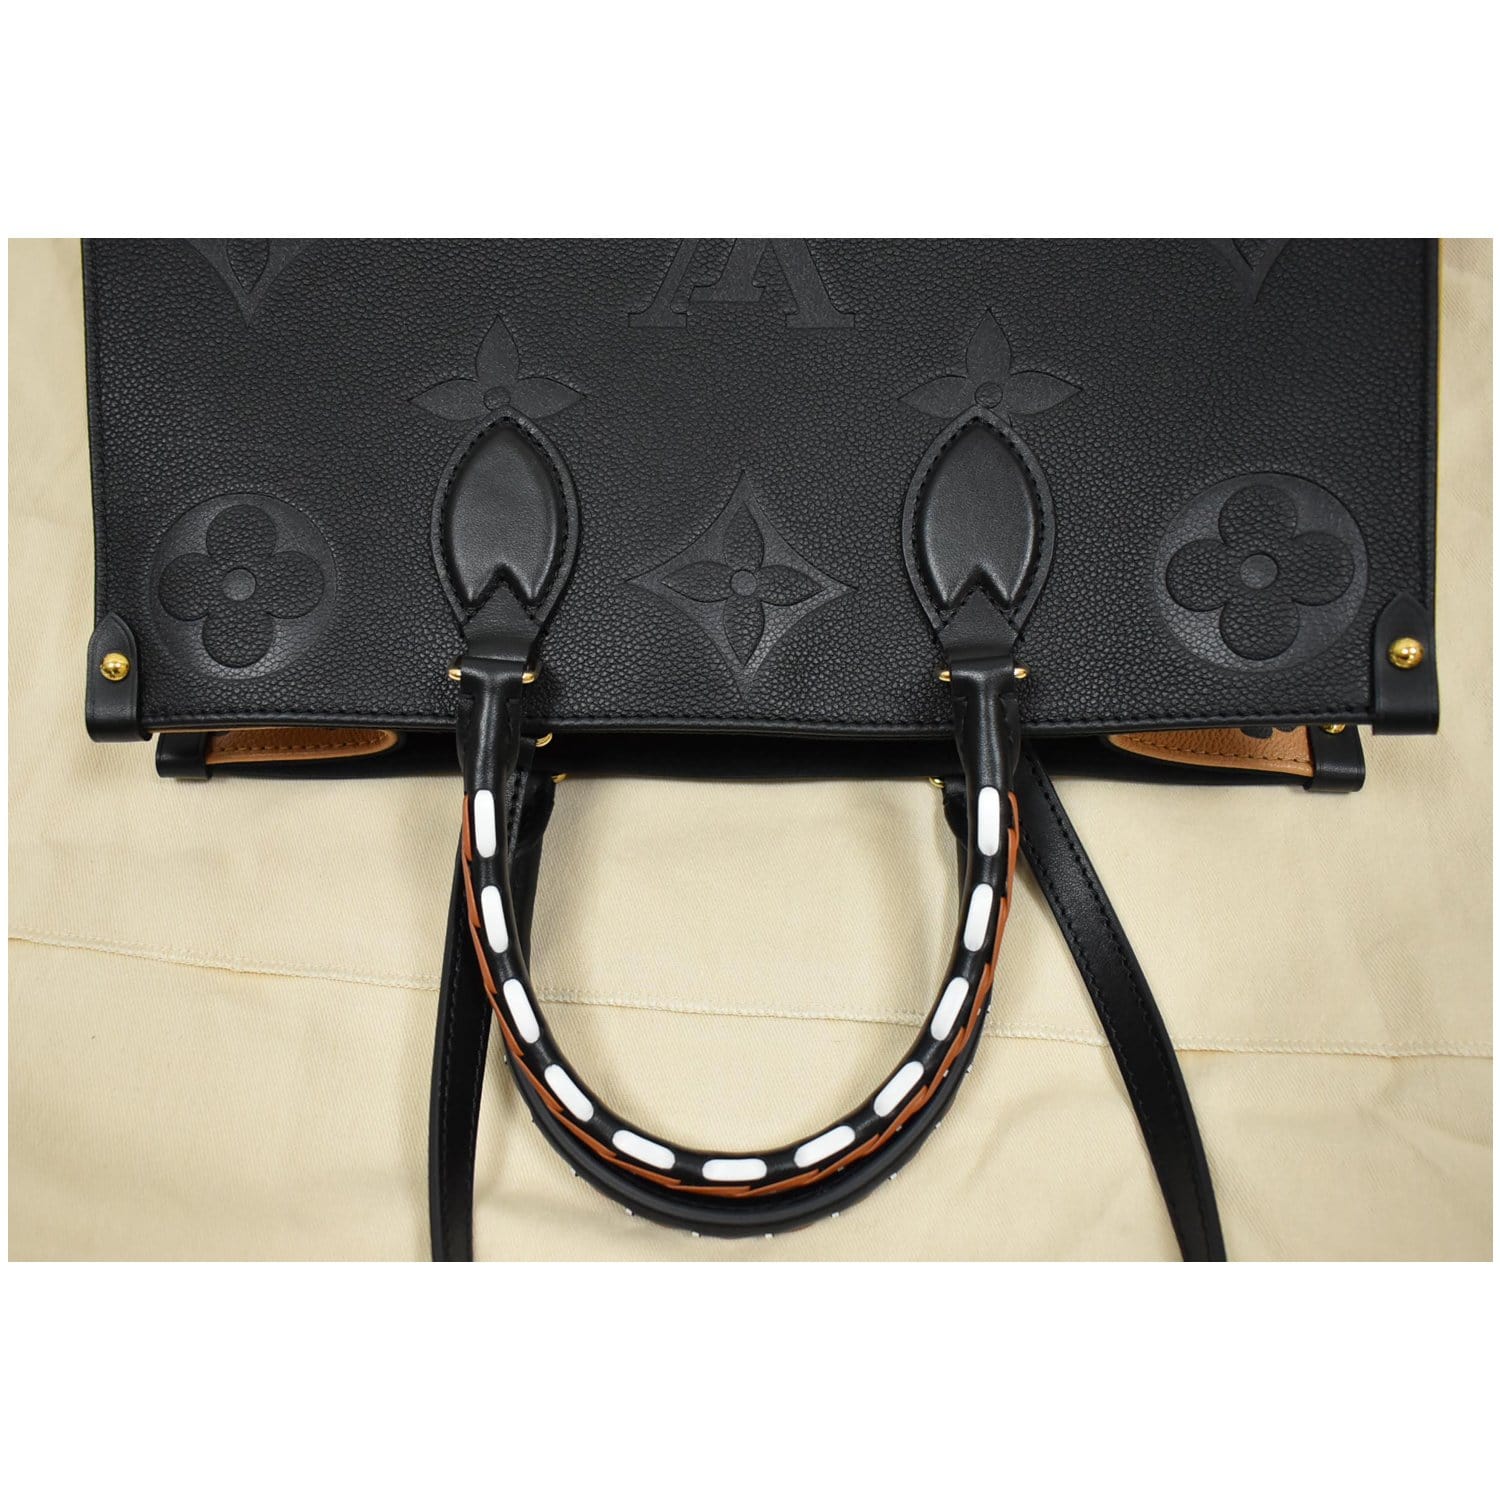 Louis Vuitton Onthego MM Wild at Heart Black in Cowhide Leather